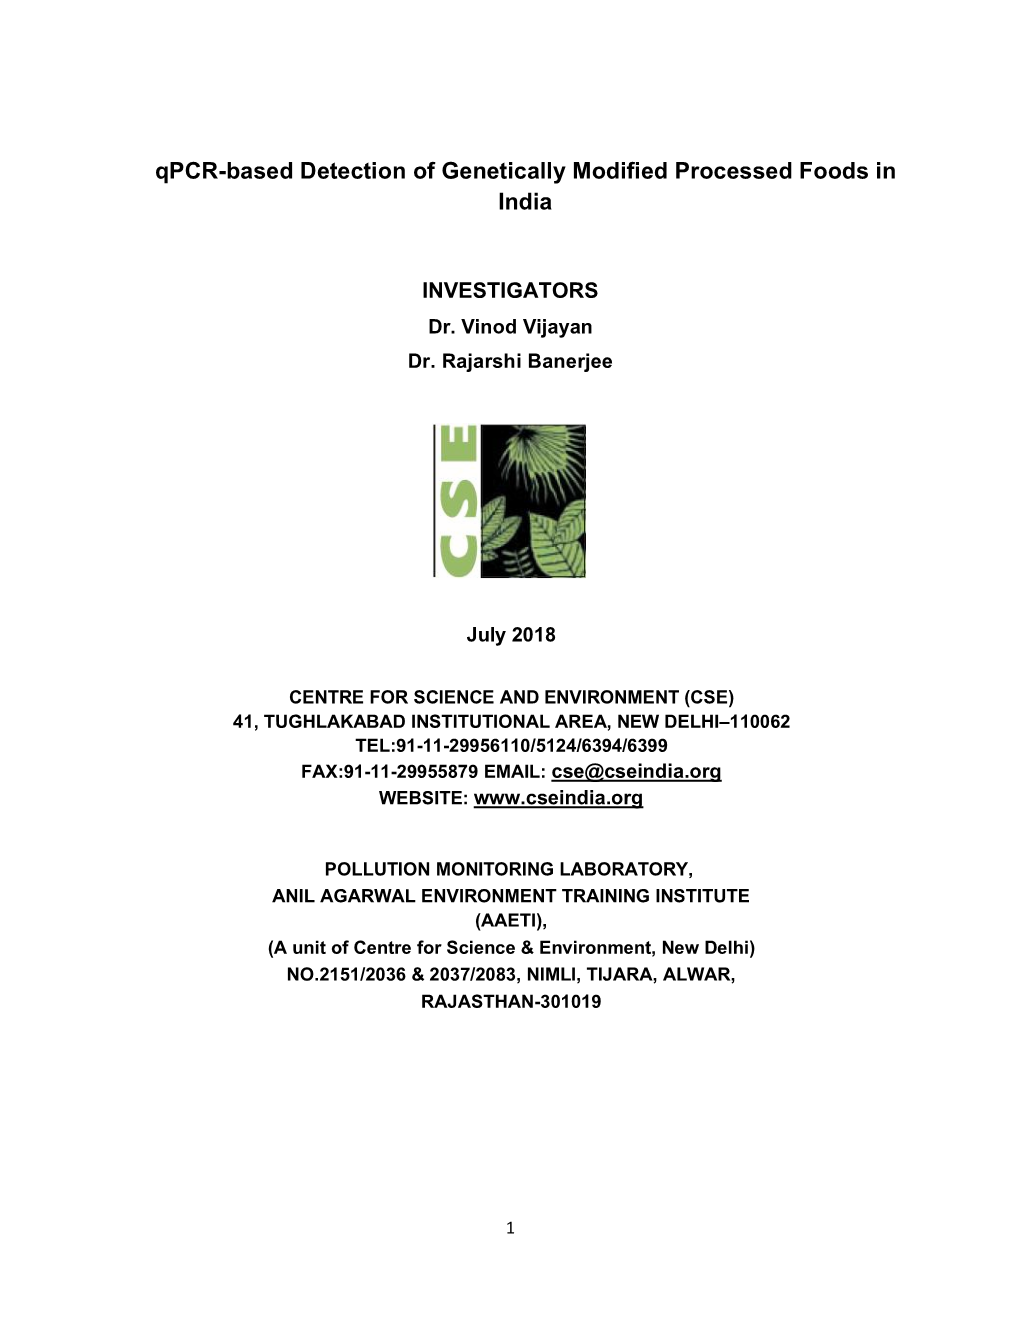 Qpcr-Based Detection of Genetically Modified Processed Foods in India